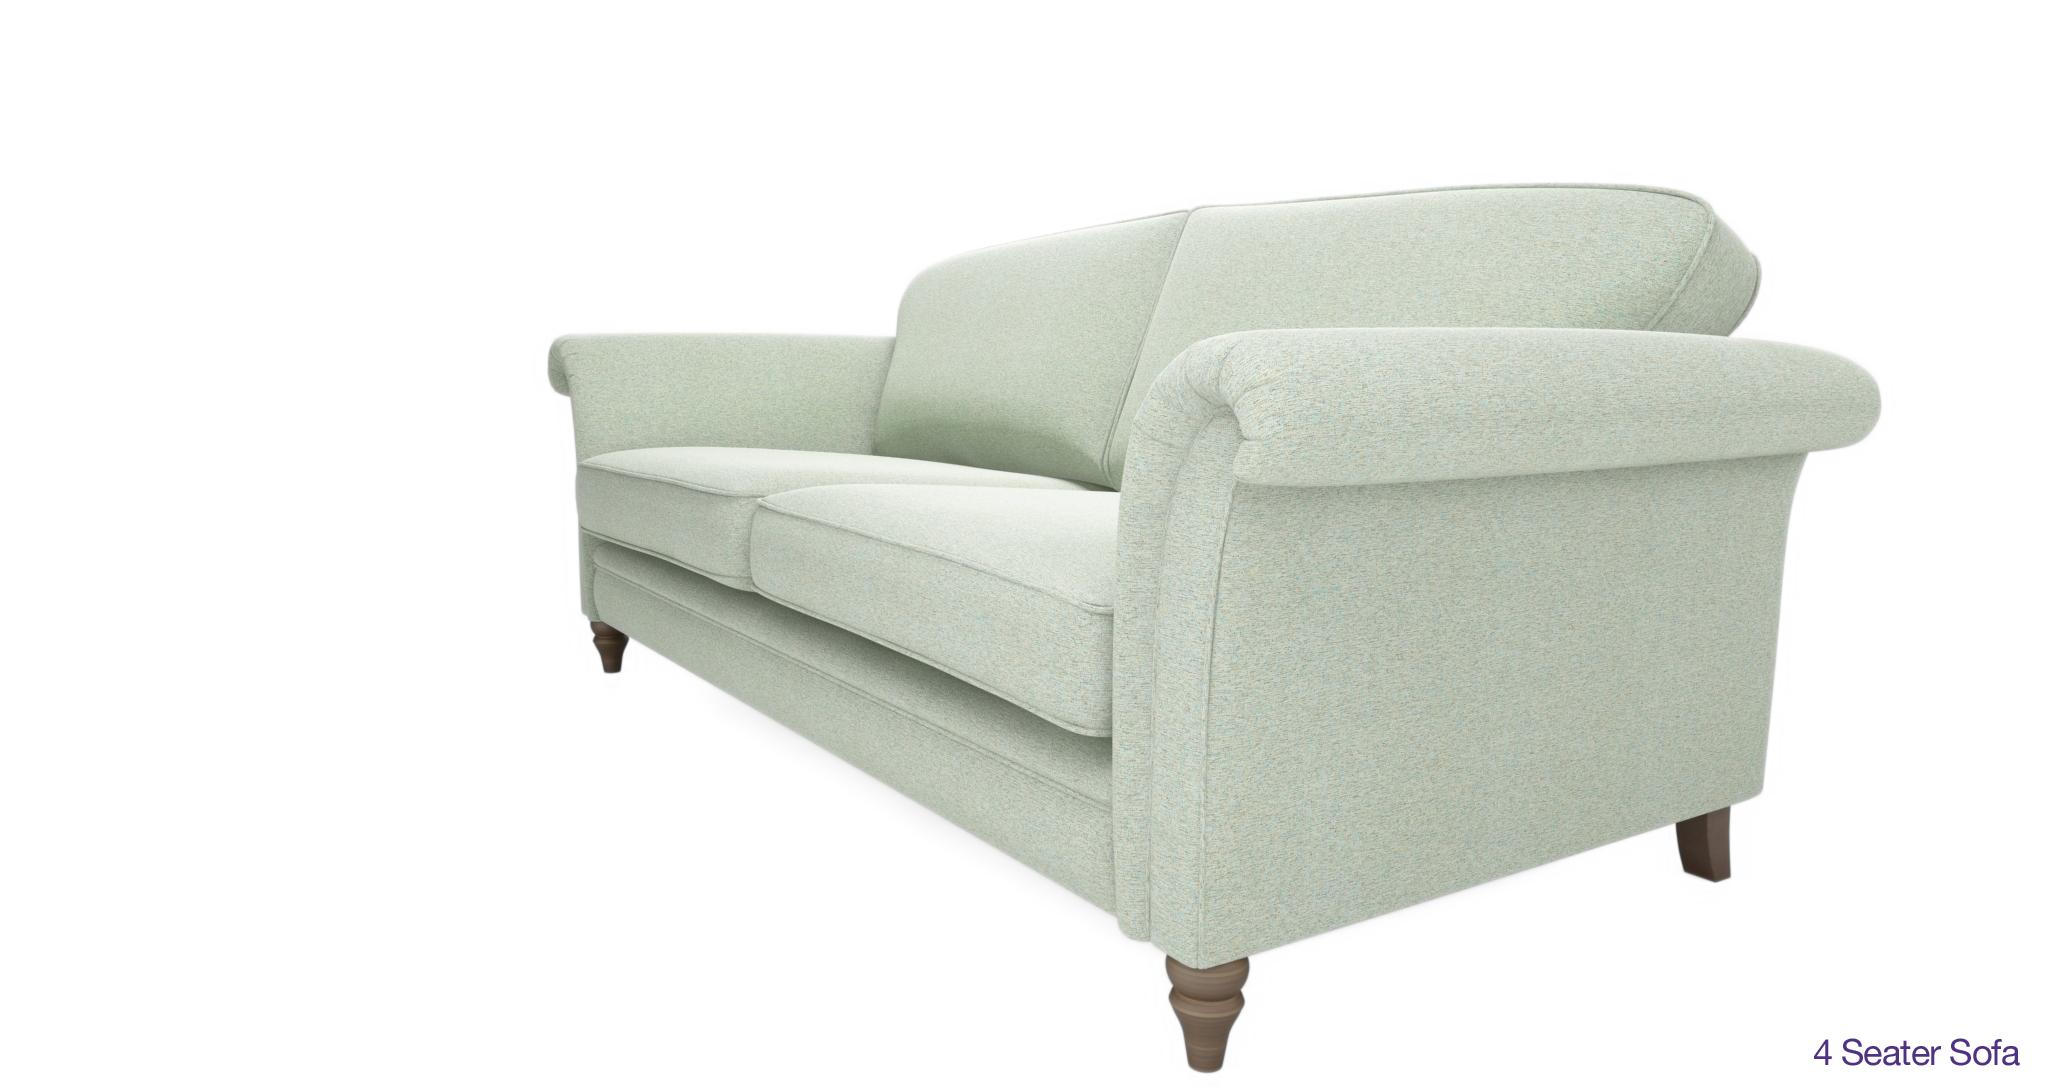 Introducing the new Woodstock sofa by Country Living x DFS